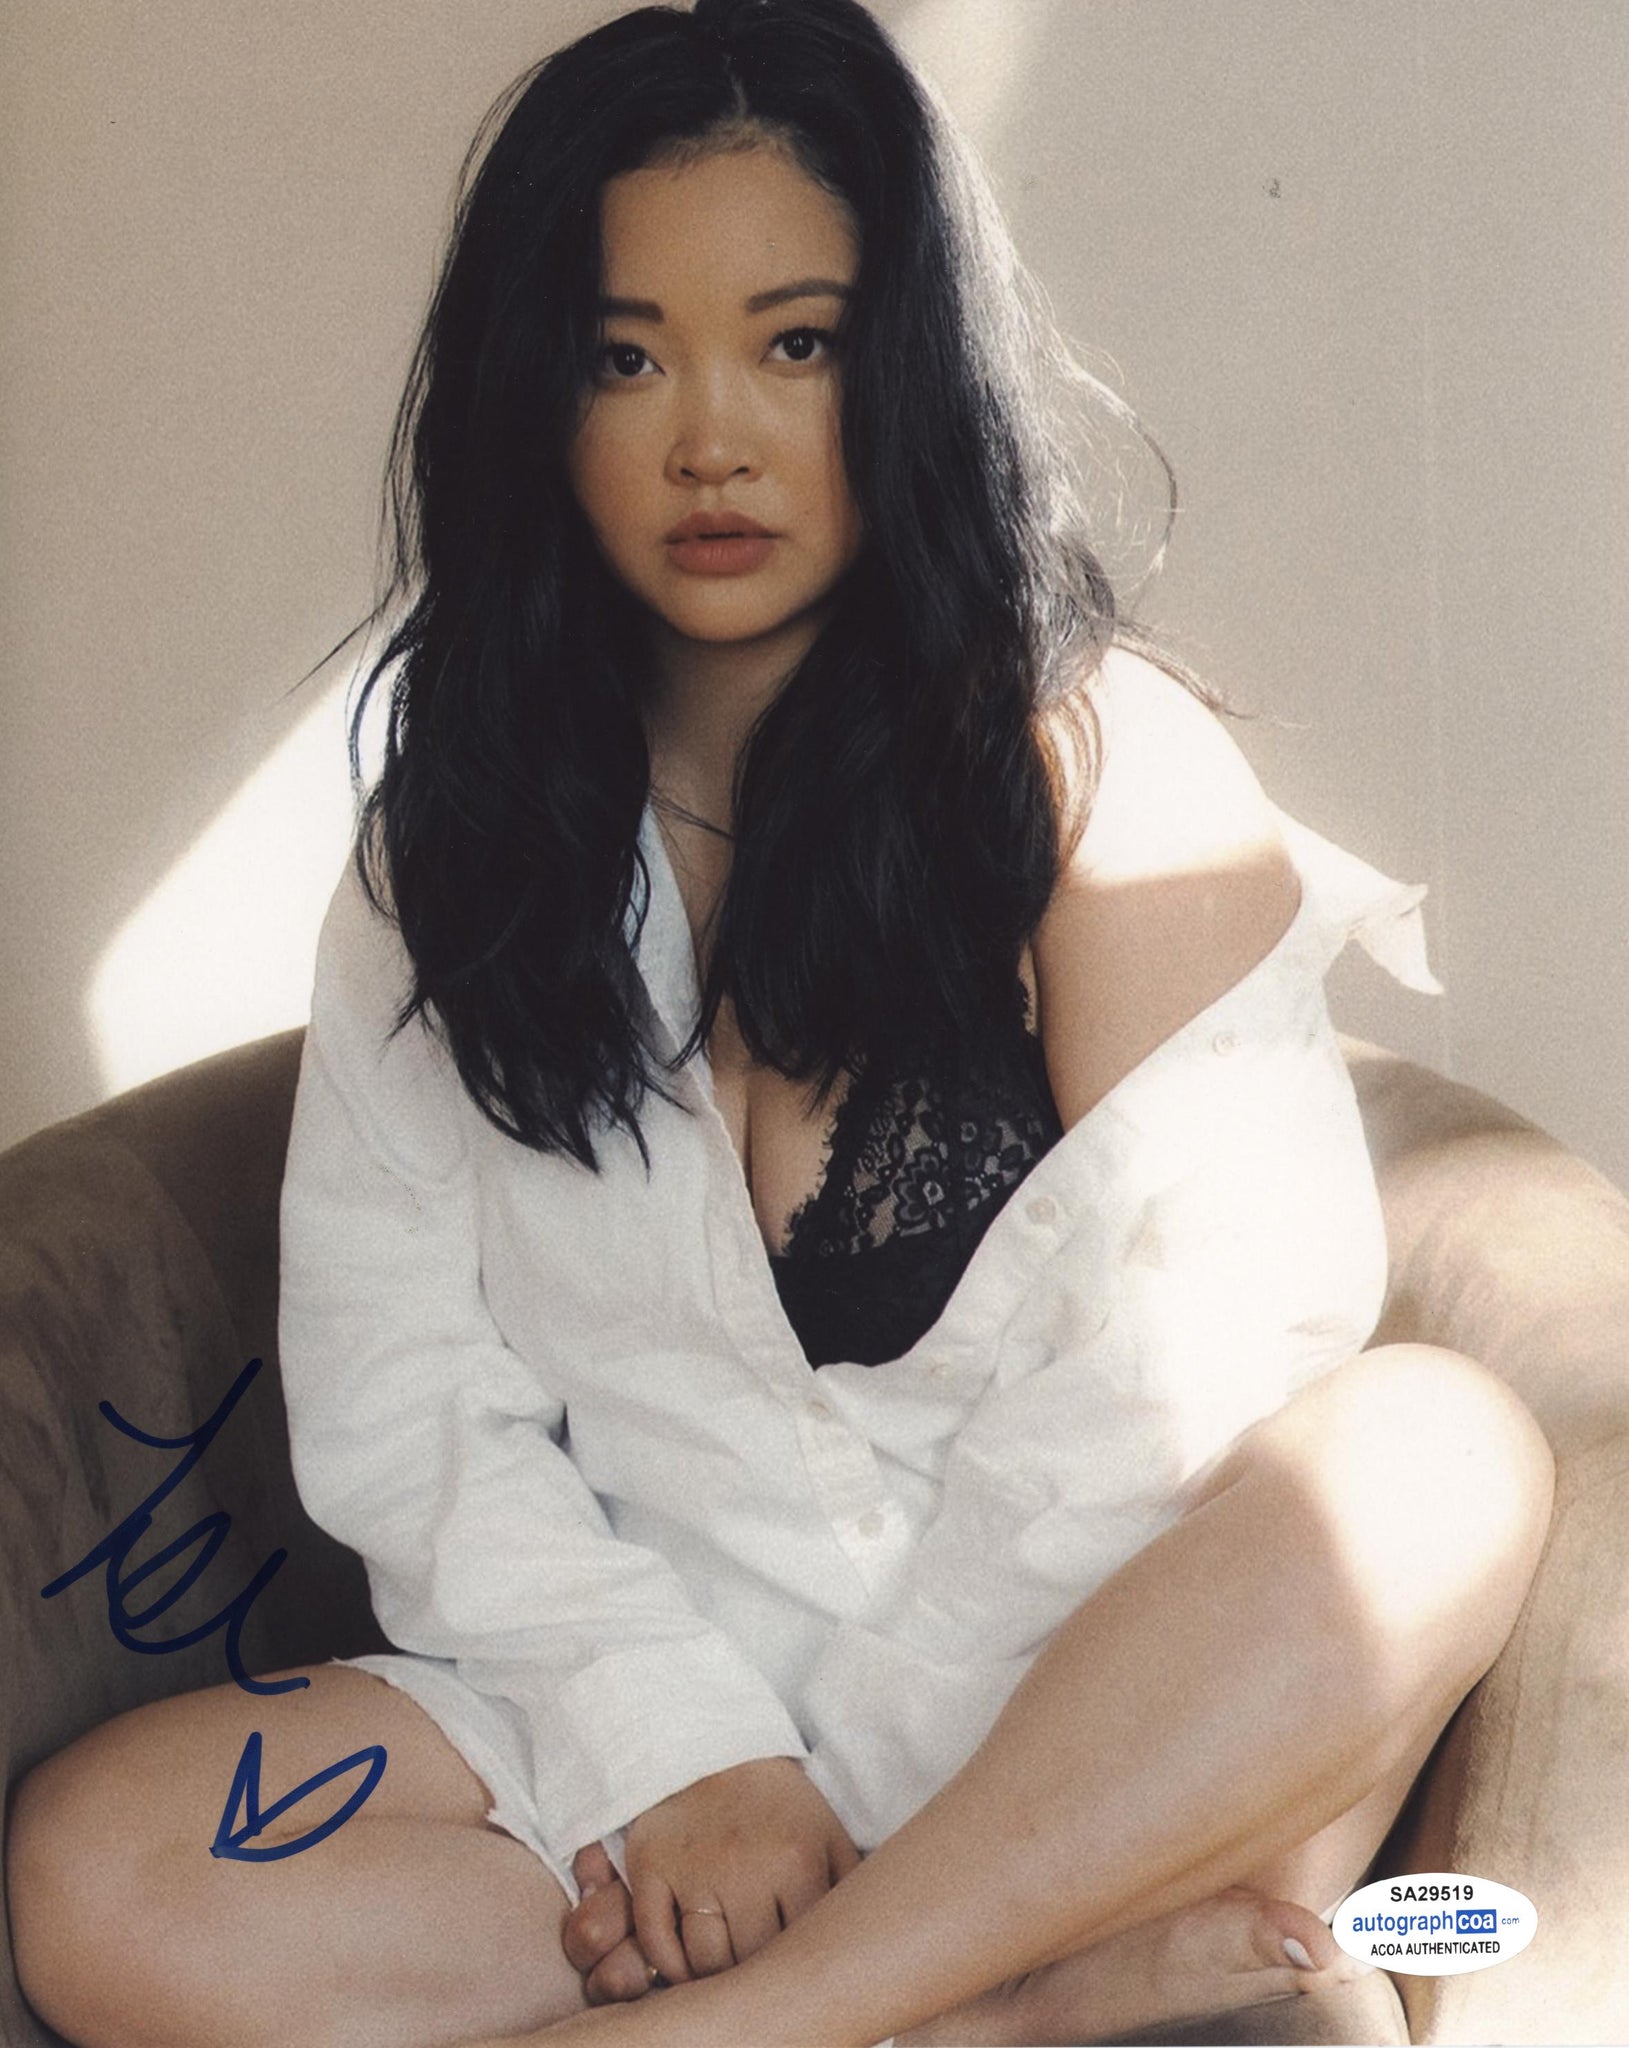 Lana Condor To All the Boys Signed Autograph 8x10 Photo ACOA - Outlaw Hobbies Authentic Autographs